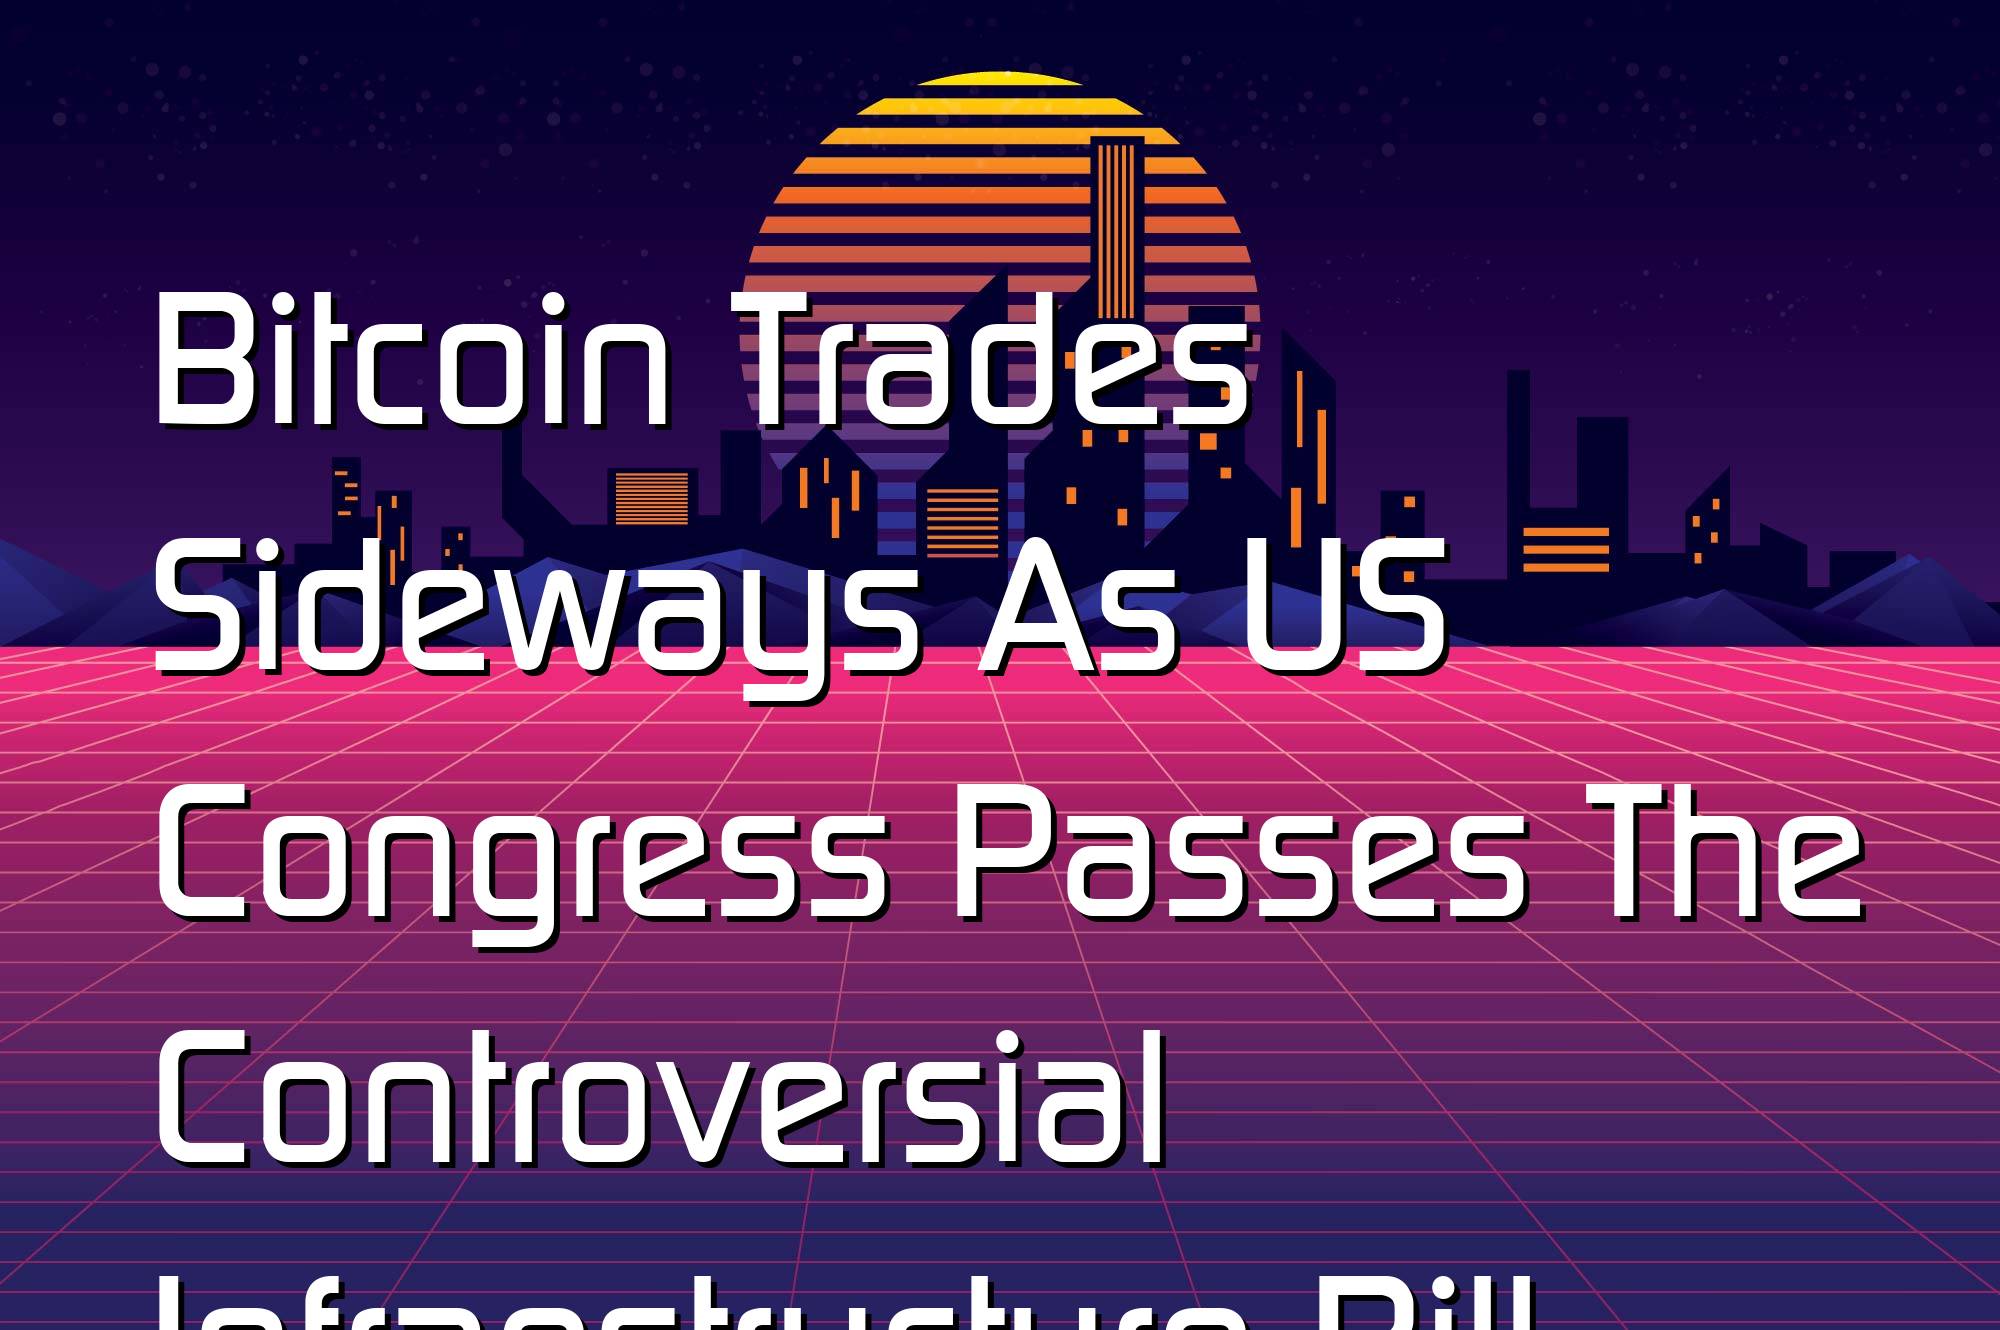 @$61517: Bitcoin Trades Sideways As US Congress Passes The Controversial Infraestructure Bill